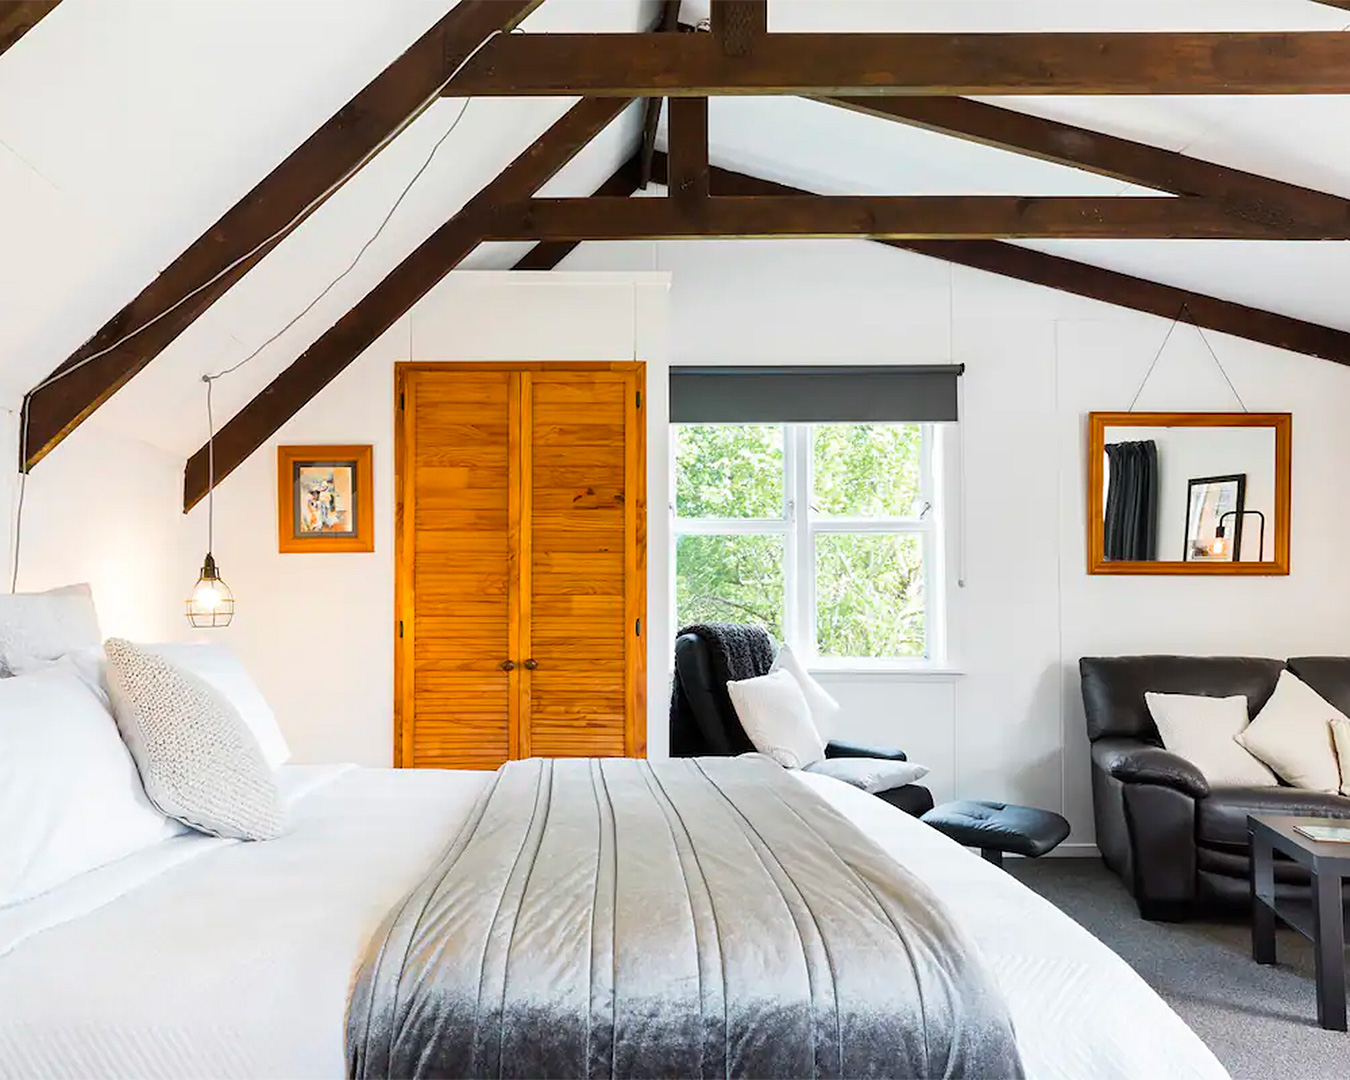 The interior of the Homestead cottage shows a lovely bedroom with oak beams.